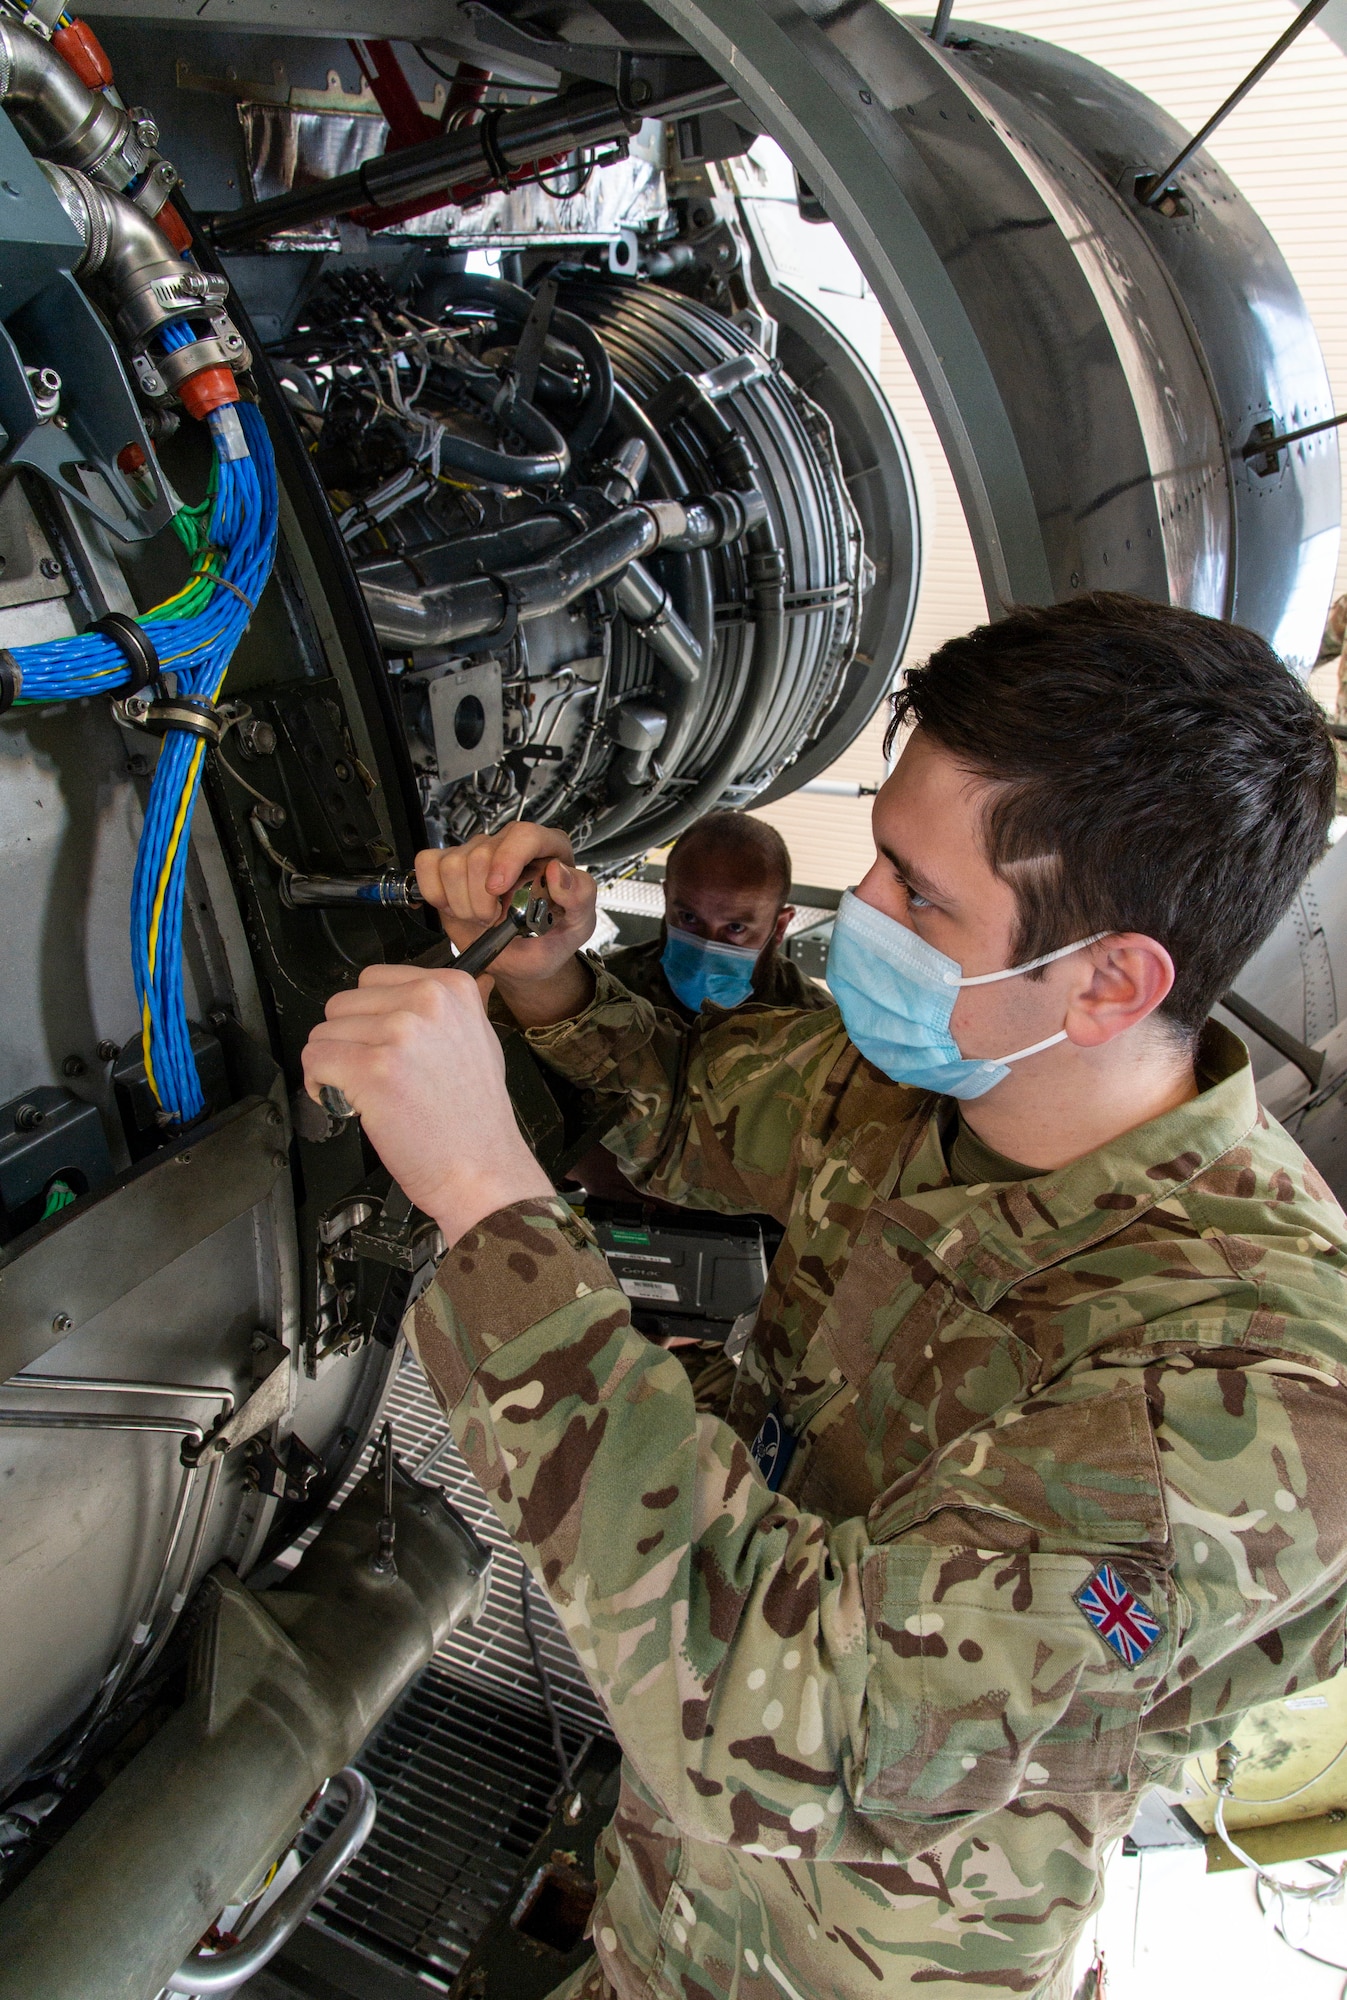 Royal Air Force Senior Aircraftman Technician William King removes a bolt from a C-17 engine trainer as RAF Sgt. David Stephens reads technical orders from a laptop at Dover Air Force Base, Delaware, Feb. 15, 2022. King and Stephen, both C-17 Globemaster maintainers from 99 Squadron, Royal Air Force Brize Norton, United Kingdom, attended the 64-hour C-17 Engine Change course where they learned how to safely remove and reinstall the Pratt & Whitney F117-PW-100 turbofan engine. (U.S. Air Force photo by Roland Balik)